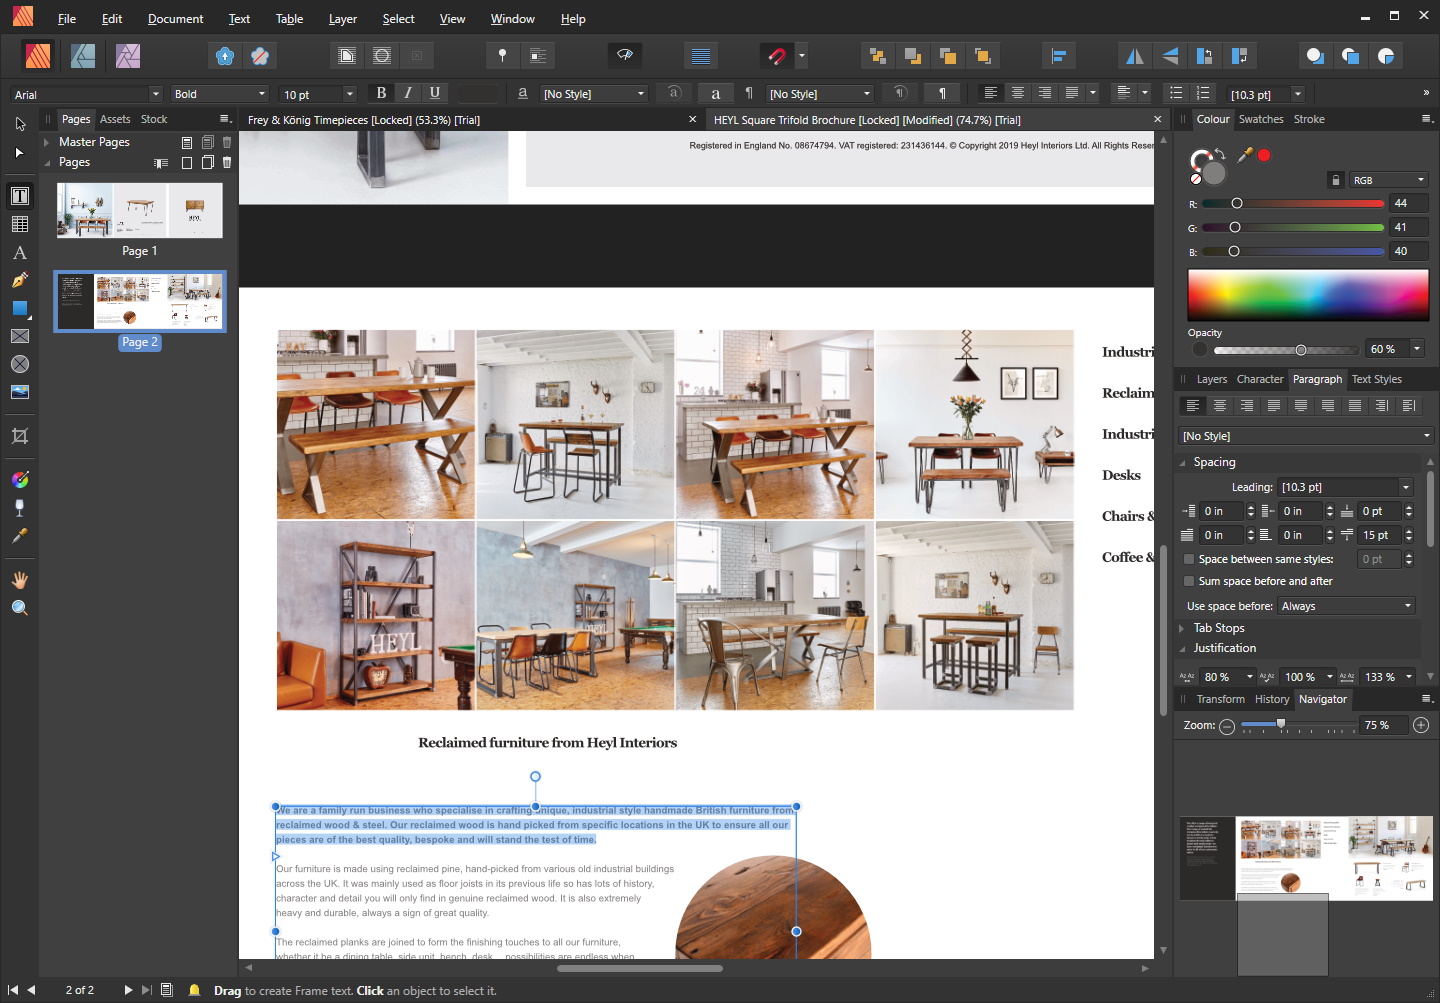 Affinity Publisher 1.9.0 free download - Software reviews, downloads